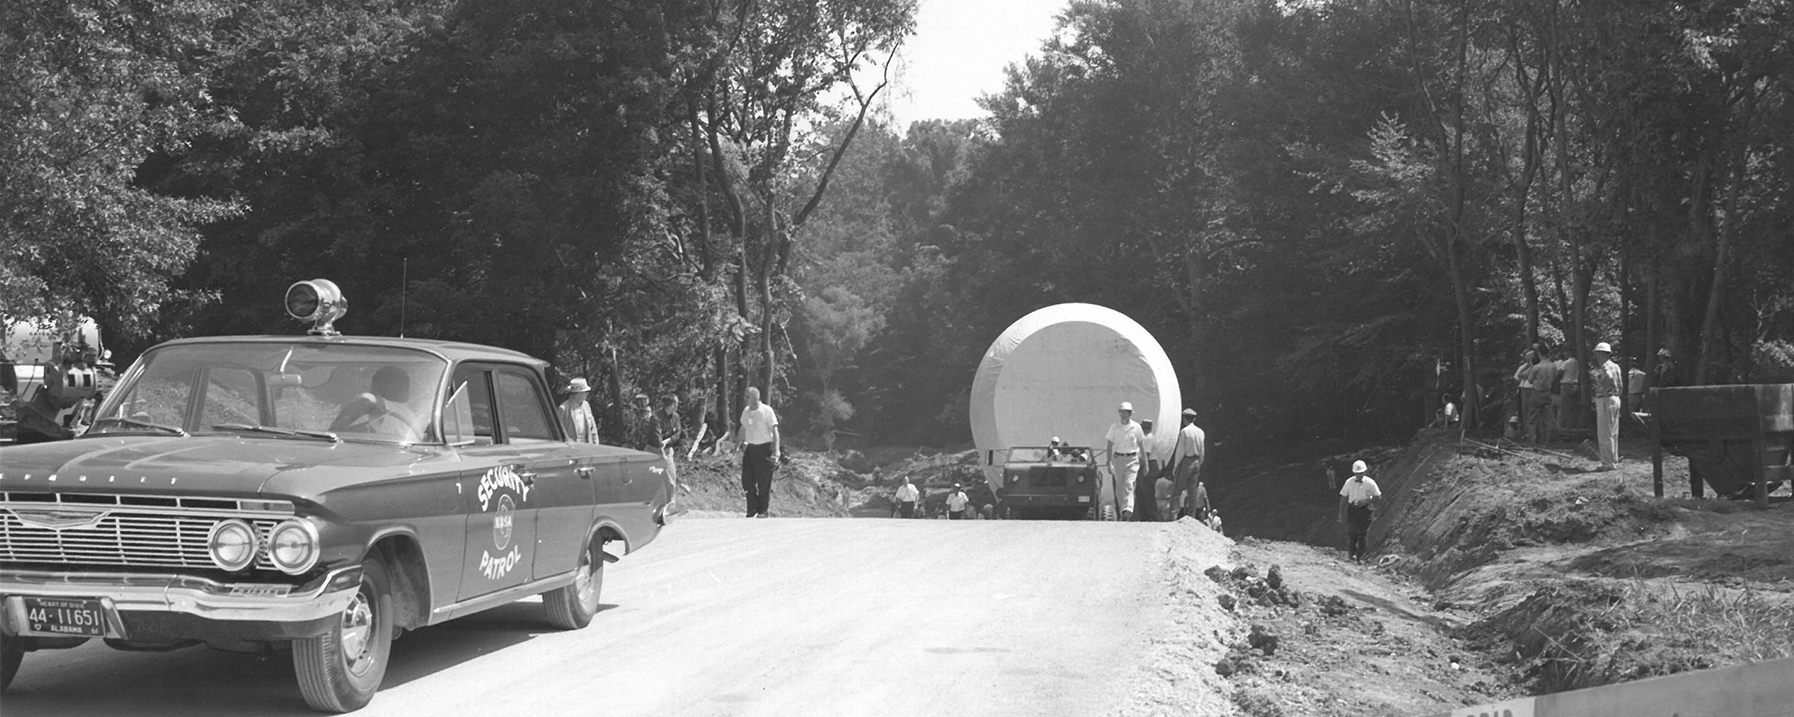 On Aug. 5, 1961, the first flight stage of the Saturn I rocket was transported around Wheeler Dam due to a failure in the dam.